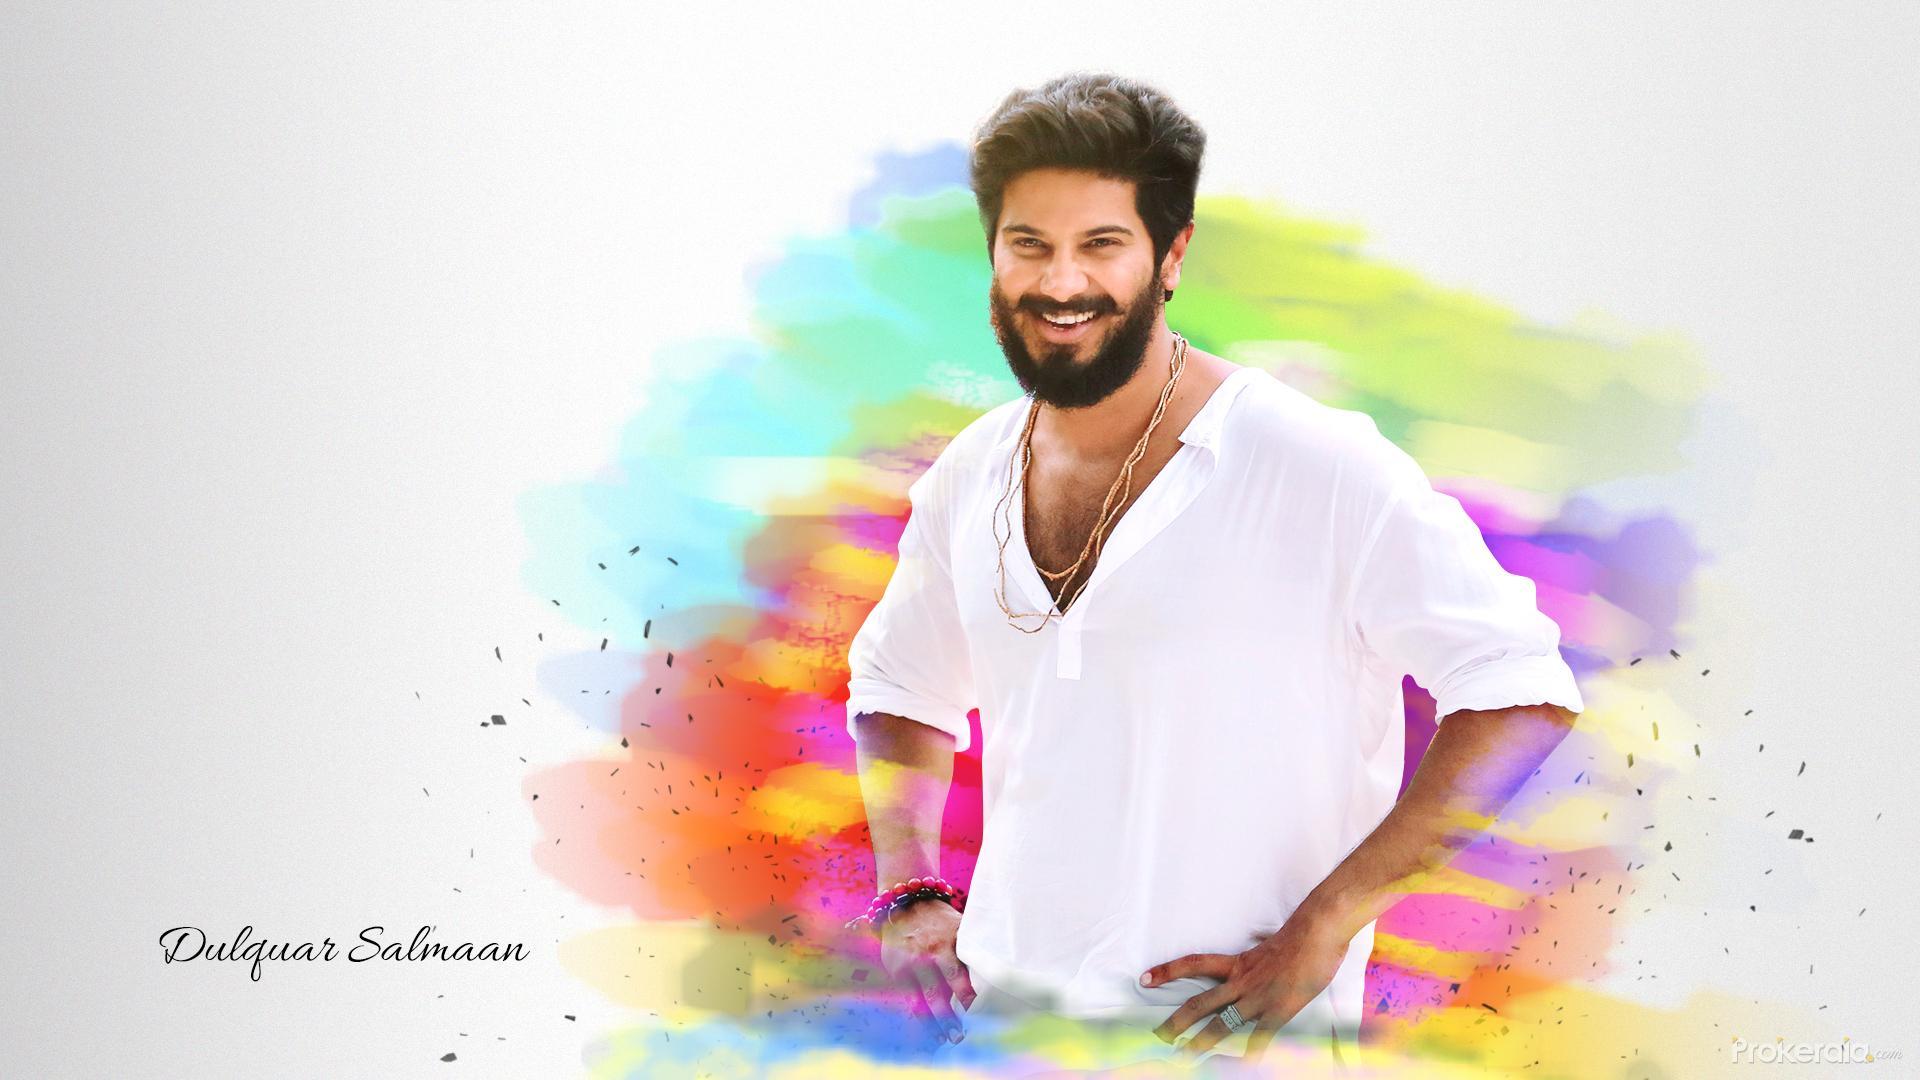 dulquer salman abcd malayalam actor wallpaper Poster Paper Print -  Personalities posters in India - Buy art, film, design, movie, music,  nature and educational paintings/wallpapers at Flipkart.com